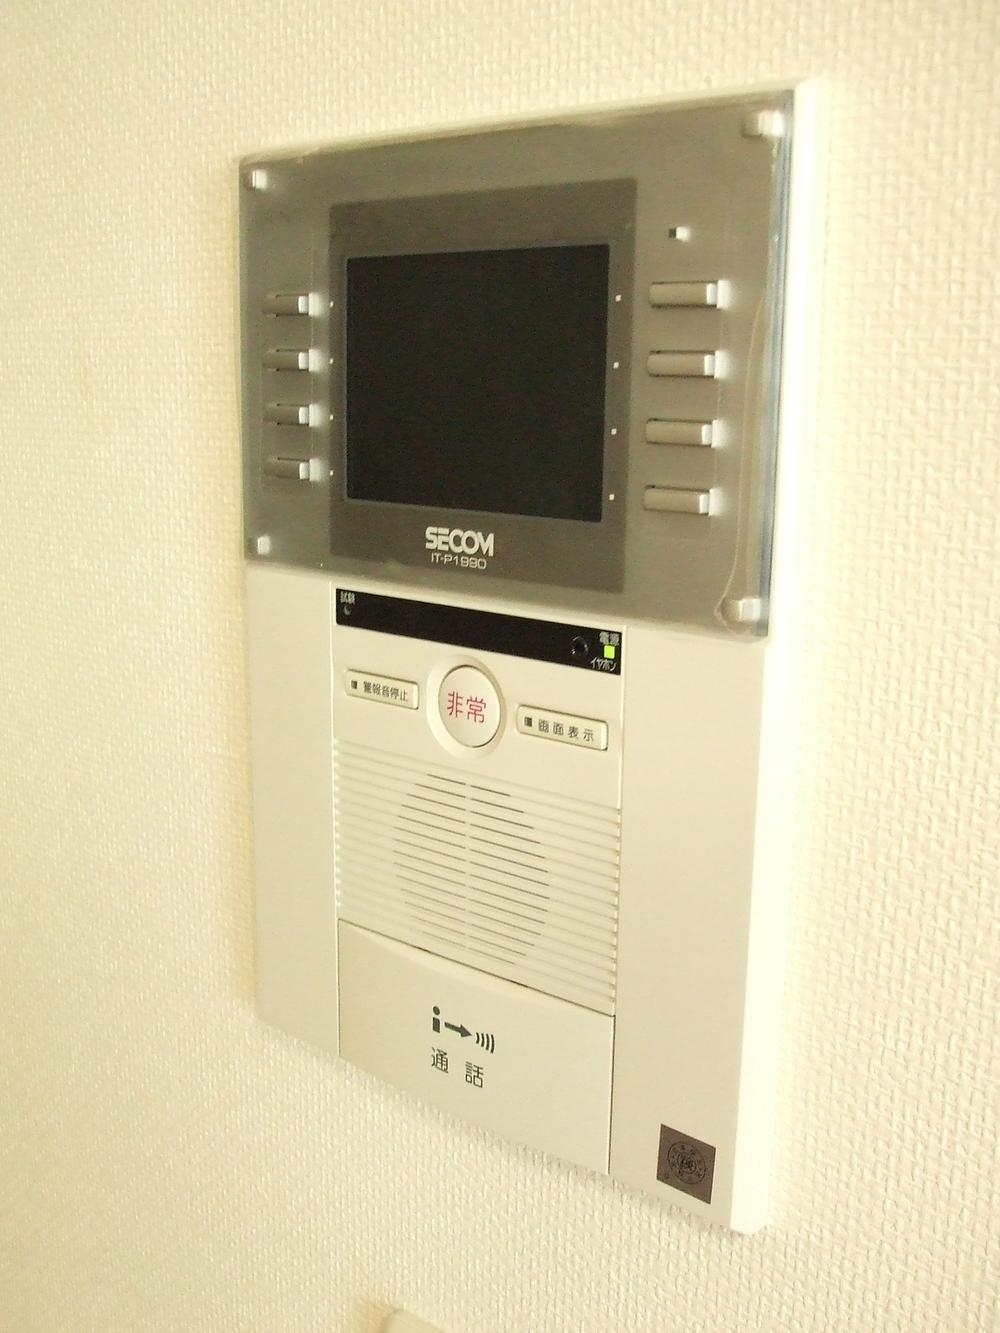 Other. TV monitor with a hands-free phone